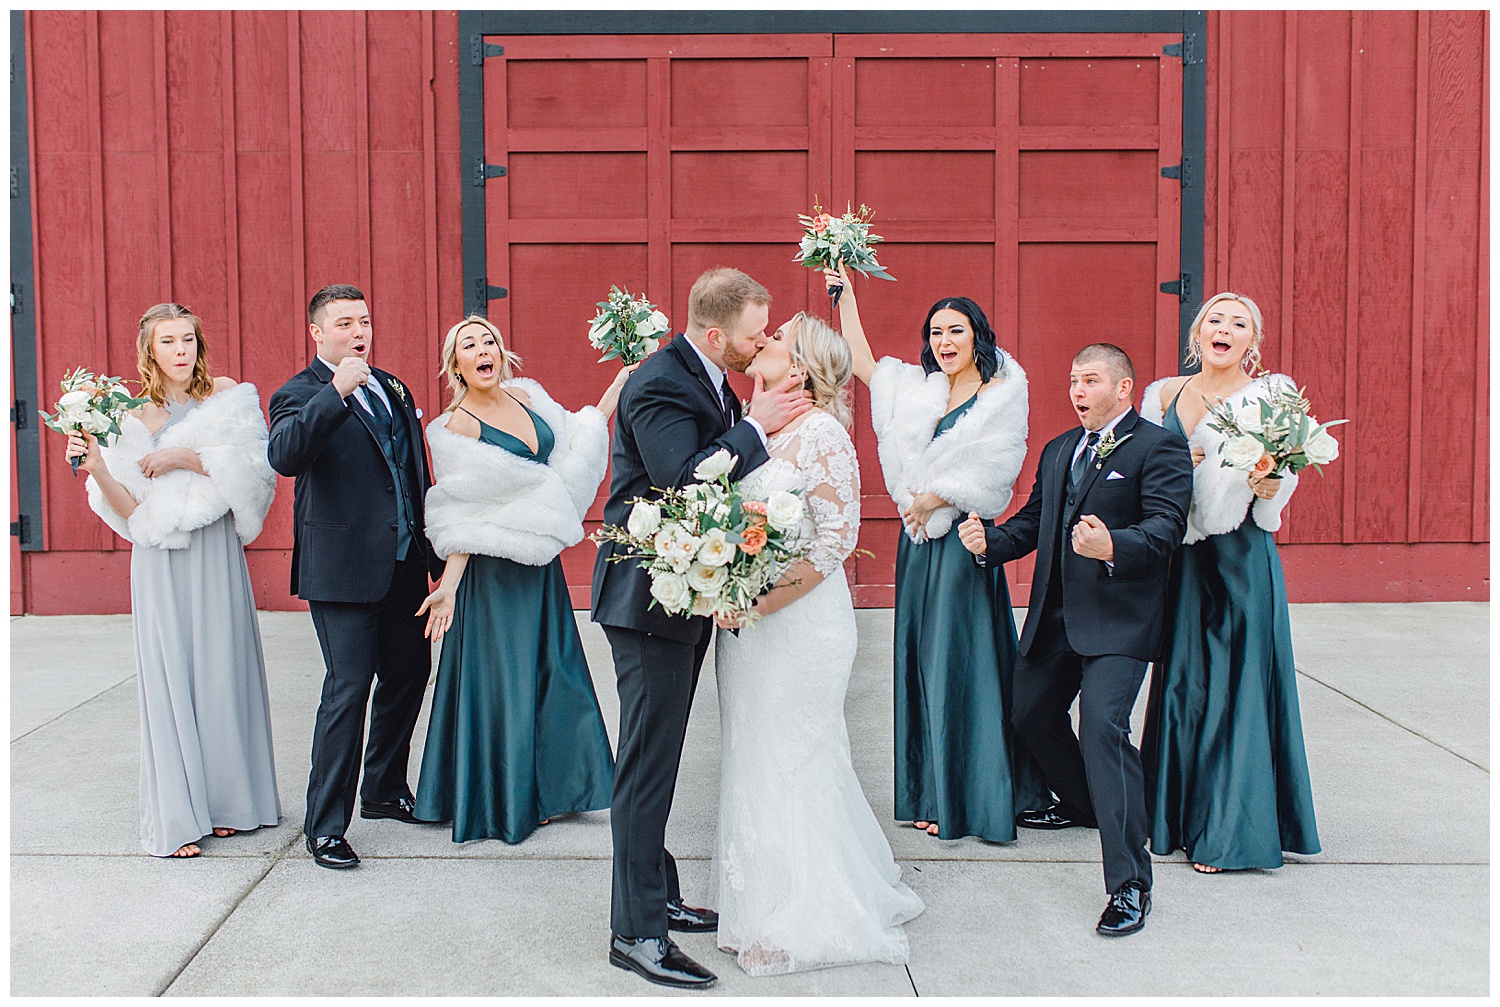 ERC-7905_A beautiful winter wedding in Snohomish, Washington at Thomas Family Farm was simply perfect.  This rustic and modern styled wedding was dripping with romance and photographed by Emma Rose Company, a pacific northwest wedding photographer..jpg